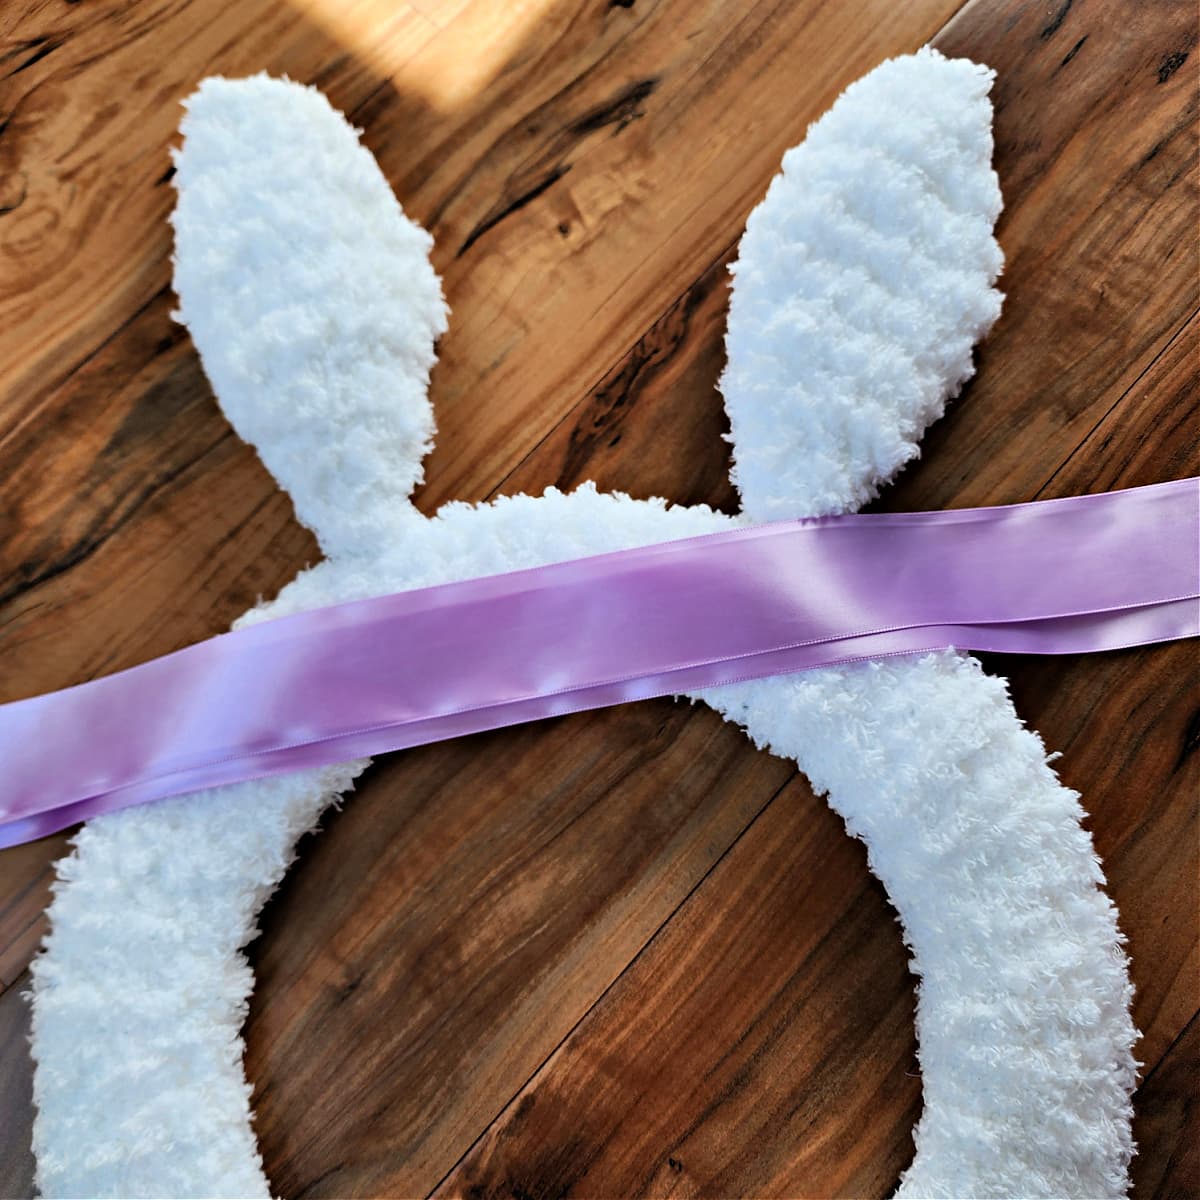 Two pieces of purple satin ribbon laying on crochet bunny wreath.